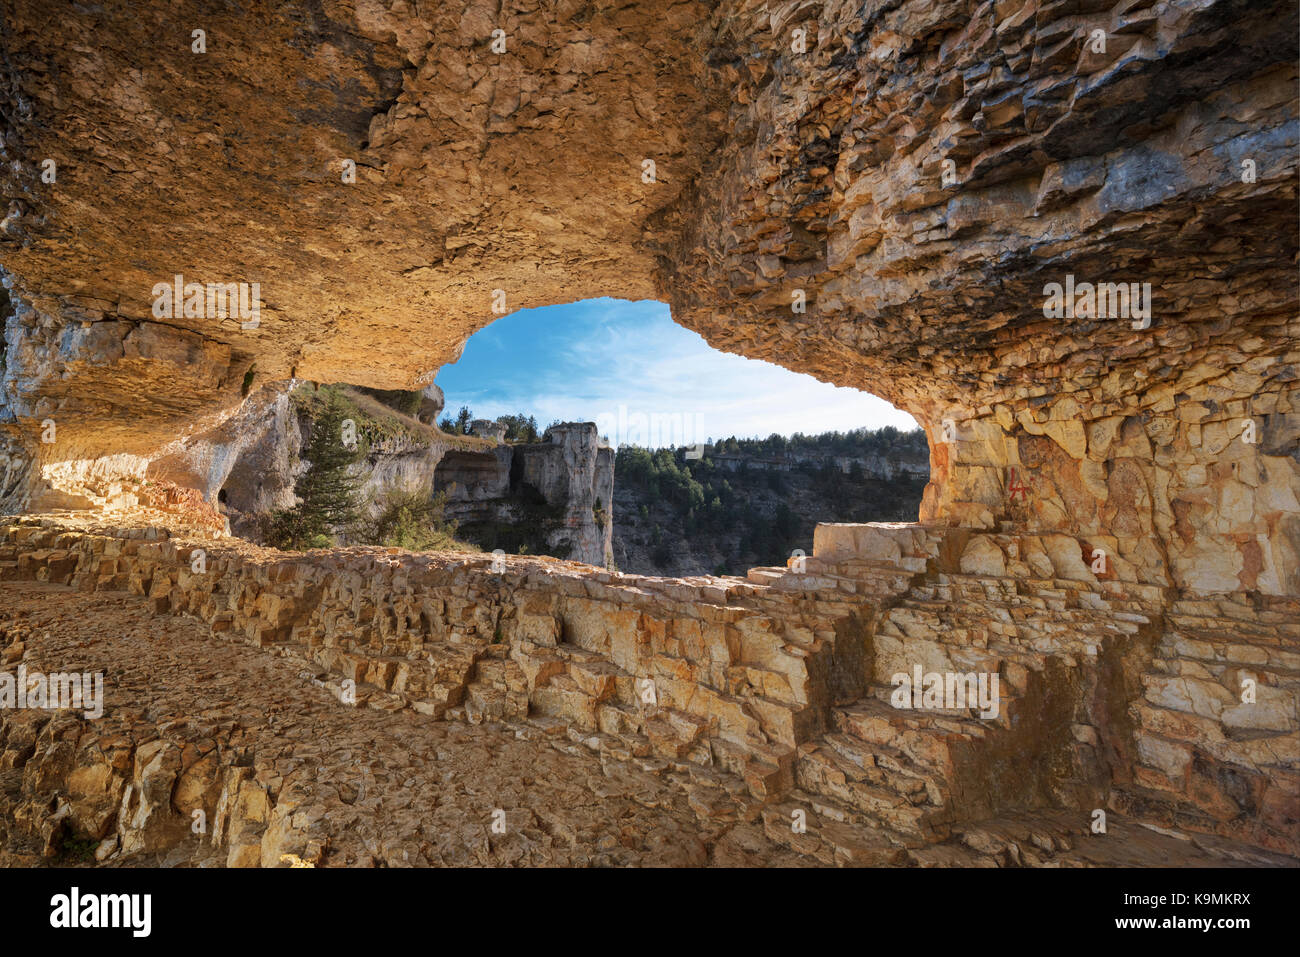 Natural hole in the rock in River wolves canyon park, Soria, Spain. Stock Photo